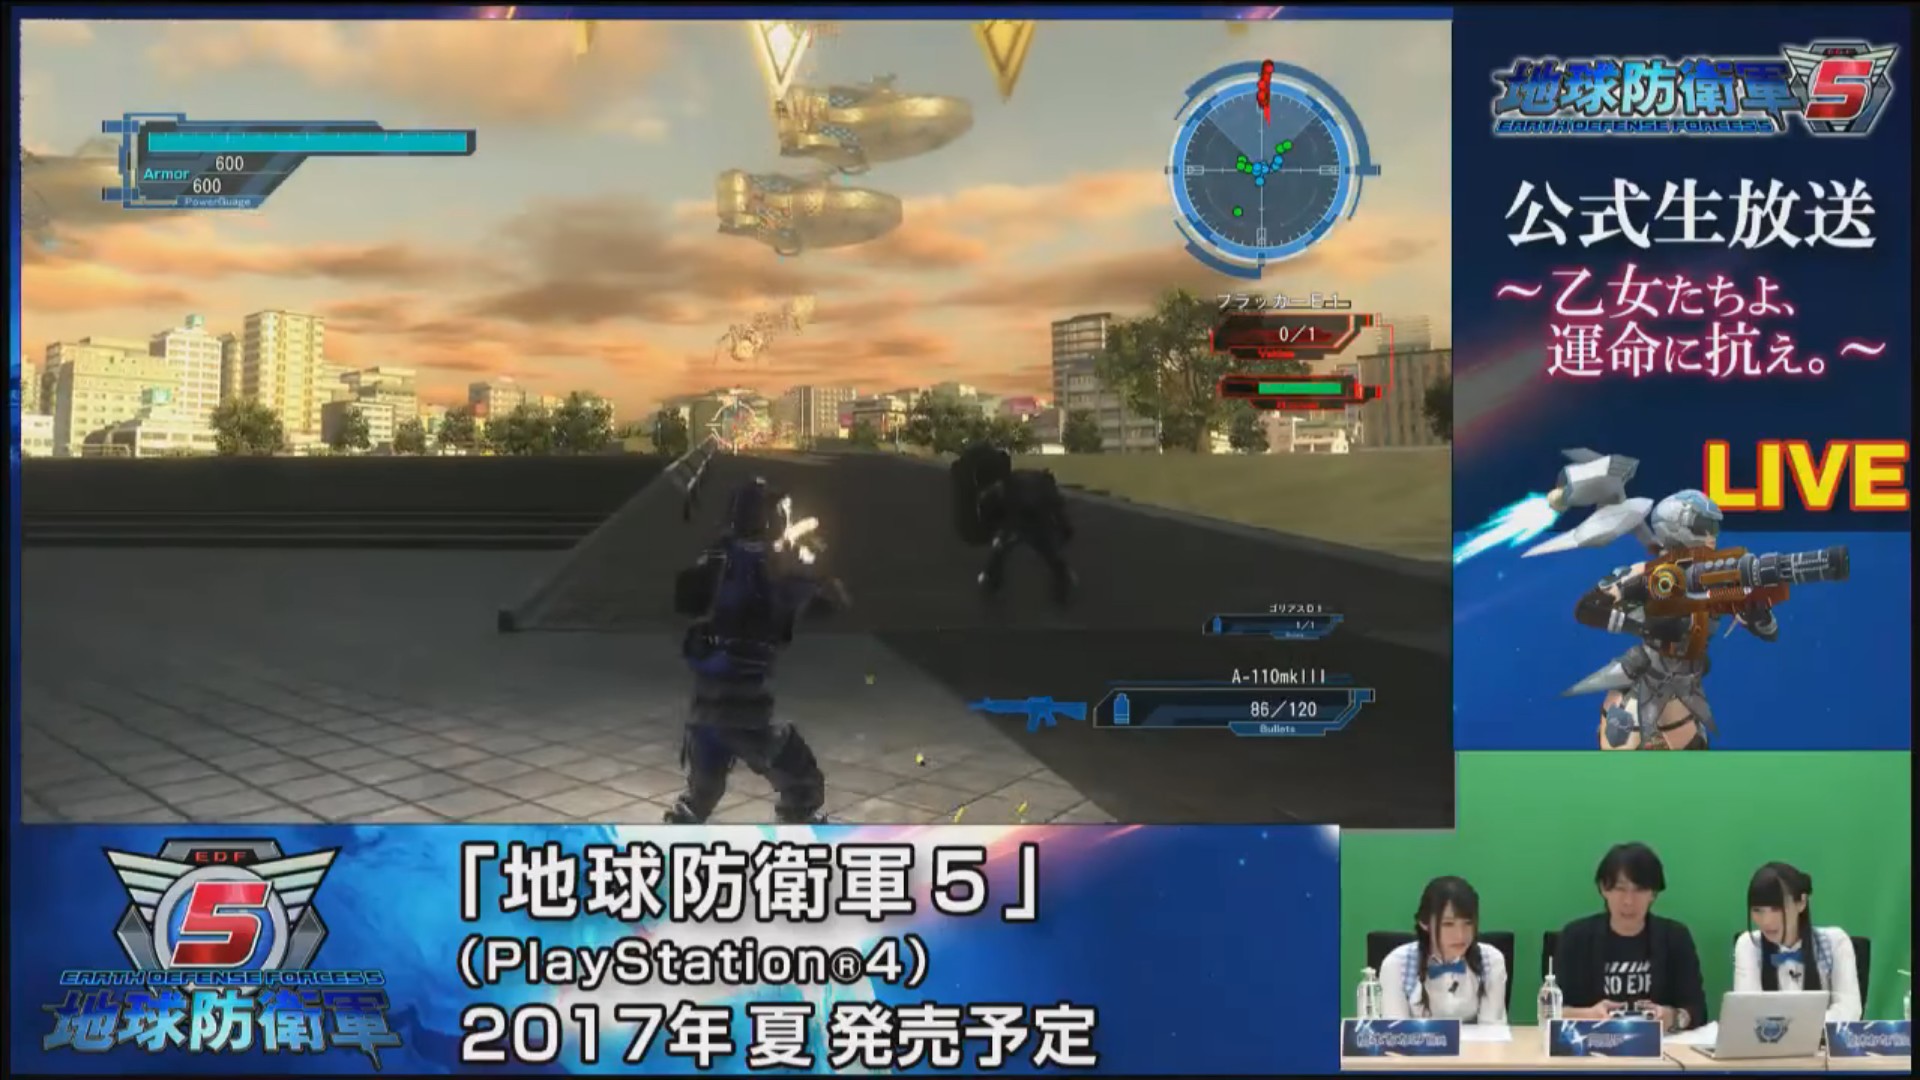 Earth defense force 5 gameplay 3